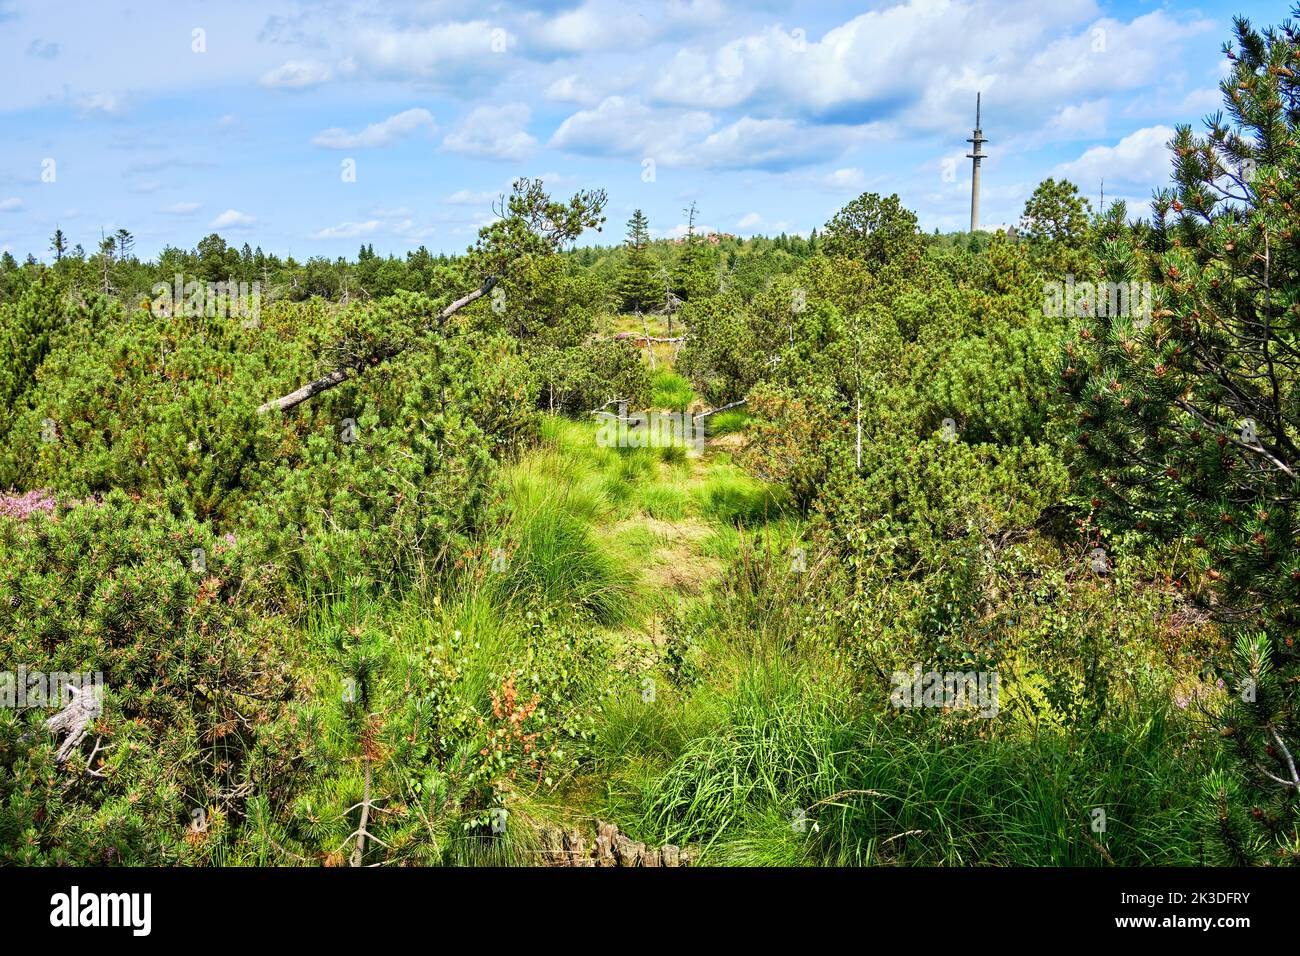 Vegetation and scenery in the nature reserve of the Georgenfeld Raised Bog (Georgenfelder Hochmoor ), Altenberg, Eastern Ore Mountains, Germany. Stock Photo